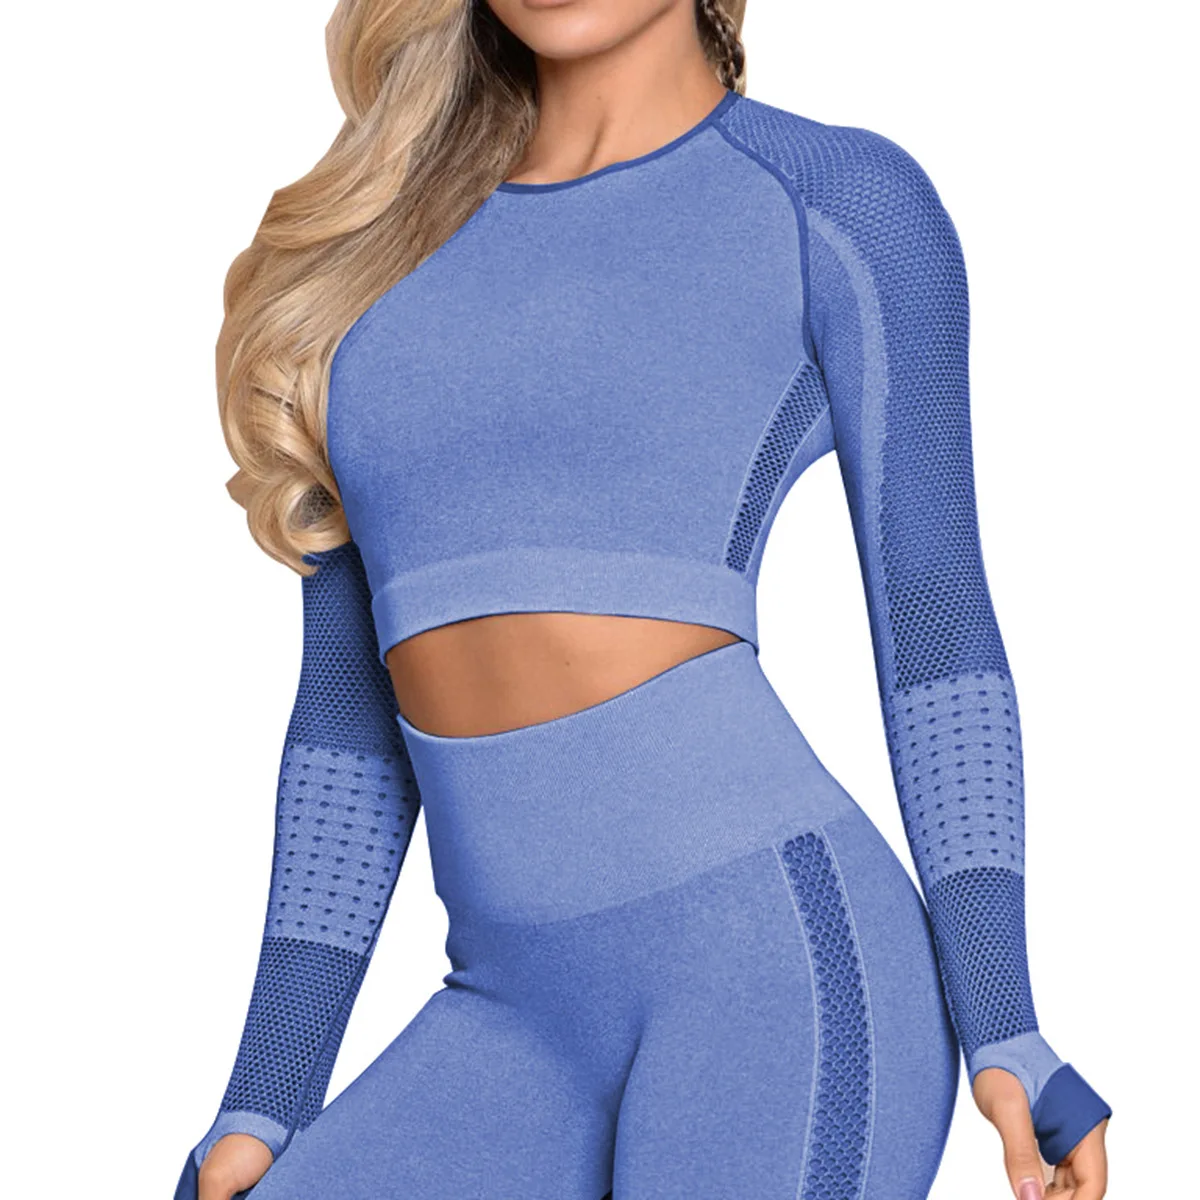 Wholesale Long Sleeve Active Wear Set For Women Manufacturer in